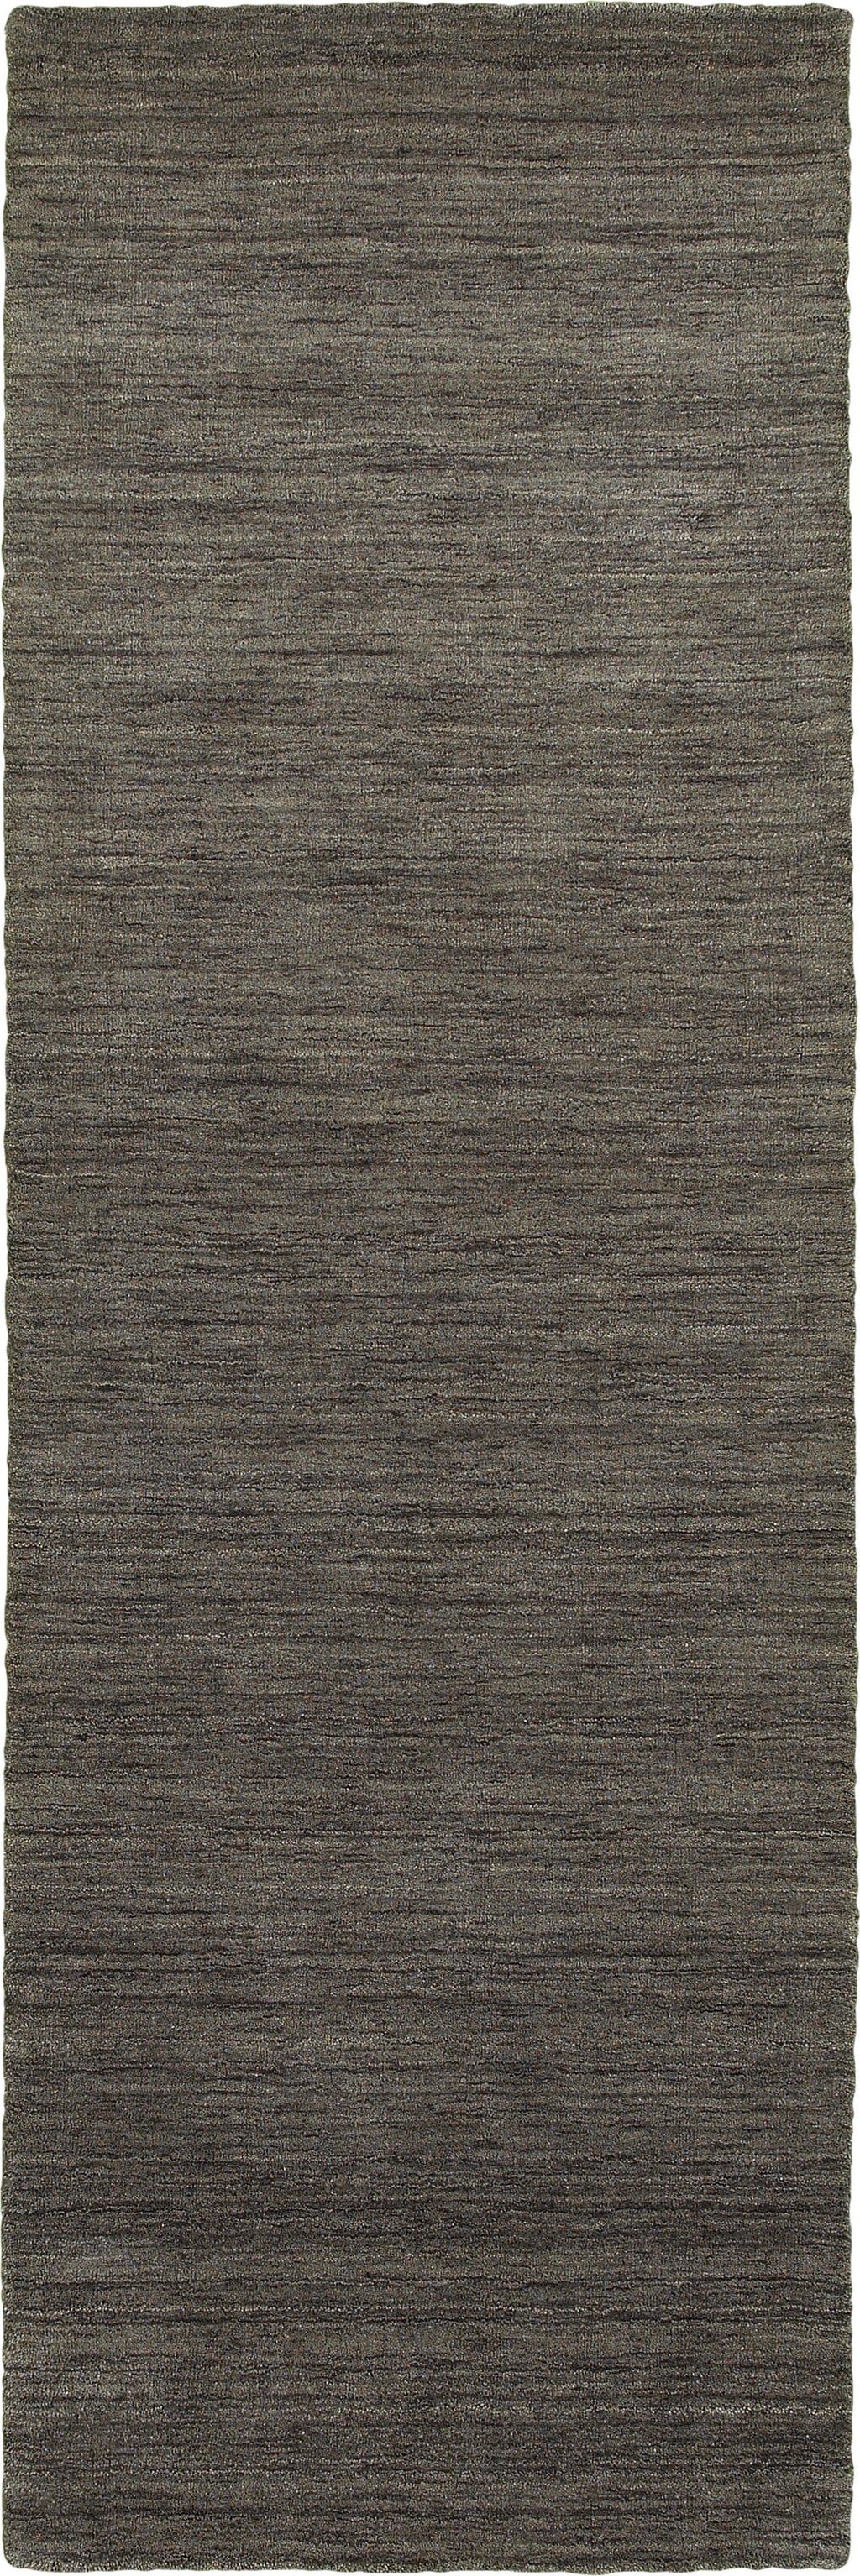 Oriental Weavers Aniston 27102 Charcoal/Charcoal Area Rug 2'6'' X 8' Runner Image